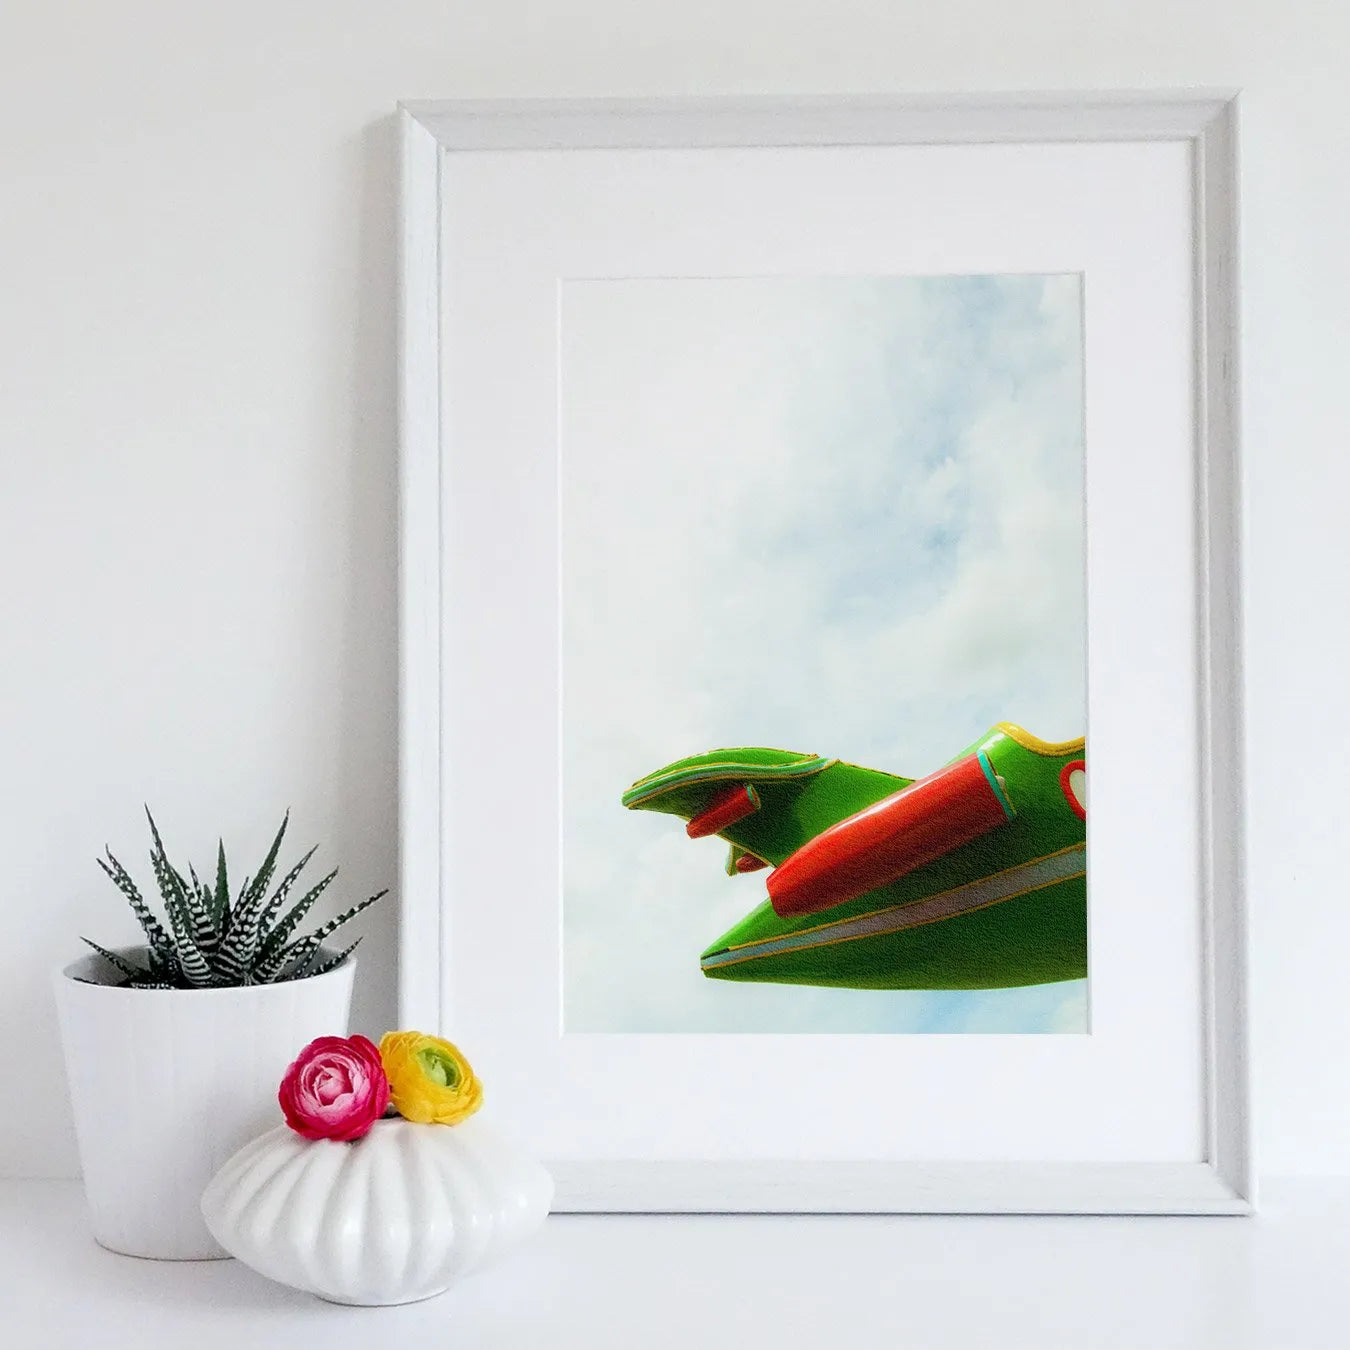 Up In The Air Giclée Print - 8×10 - Posters Prints & Visual Artwork - Aesthetic Art